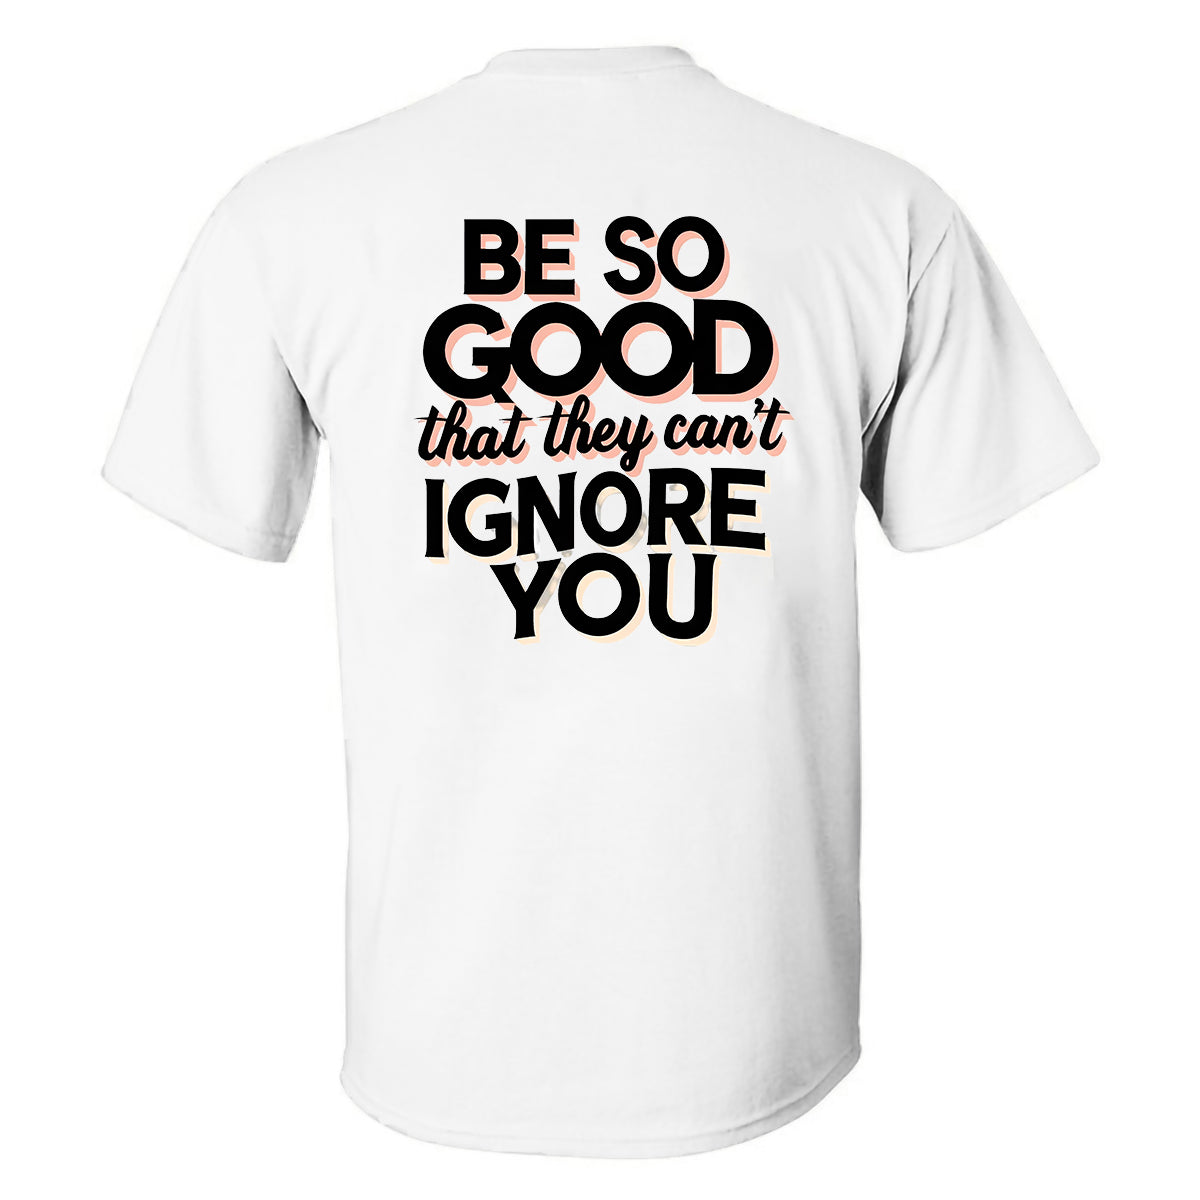 Be So Good That They Can't Ignore You Printed Men's T-shirt